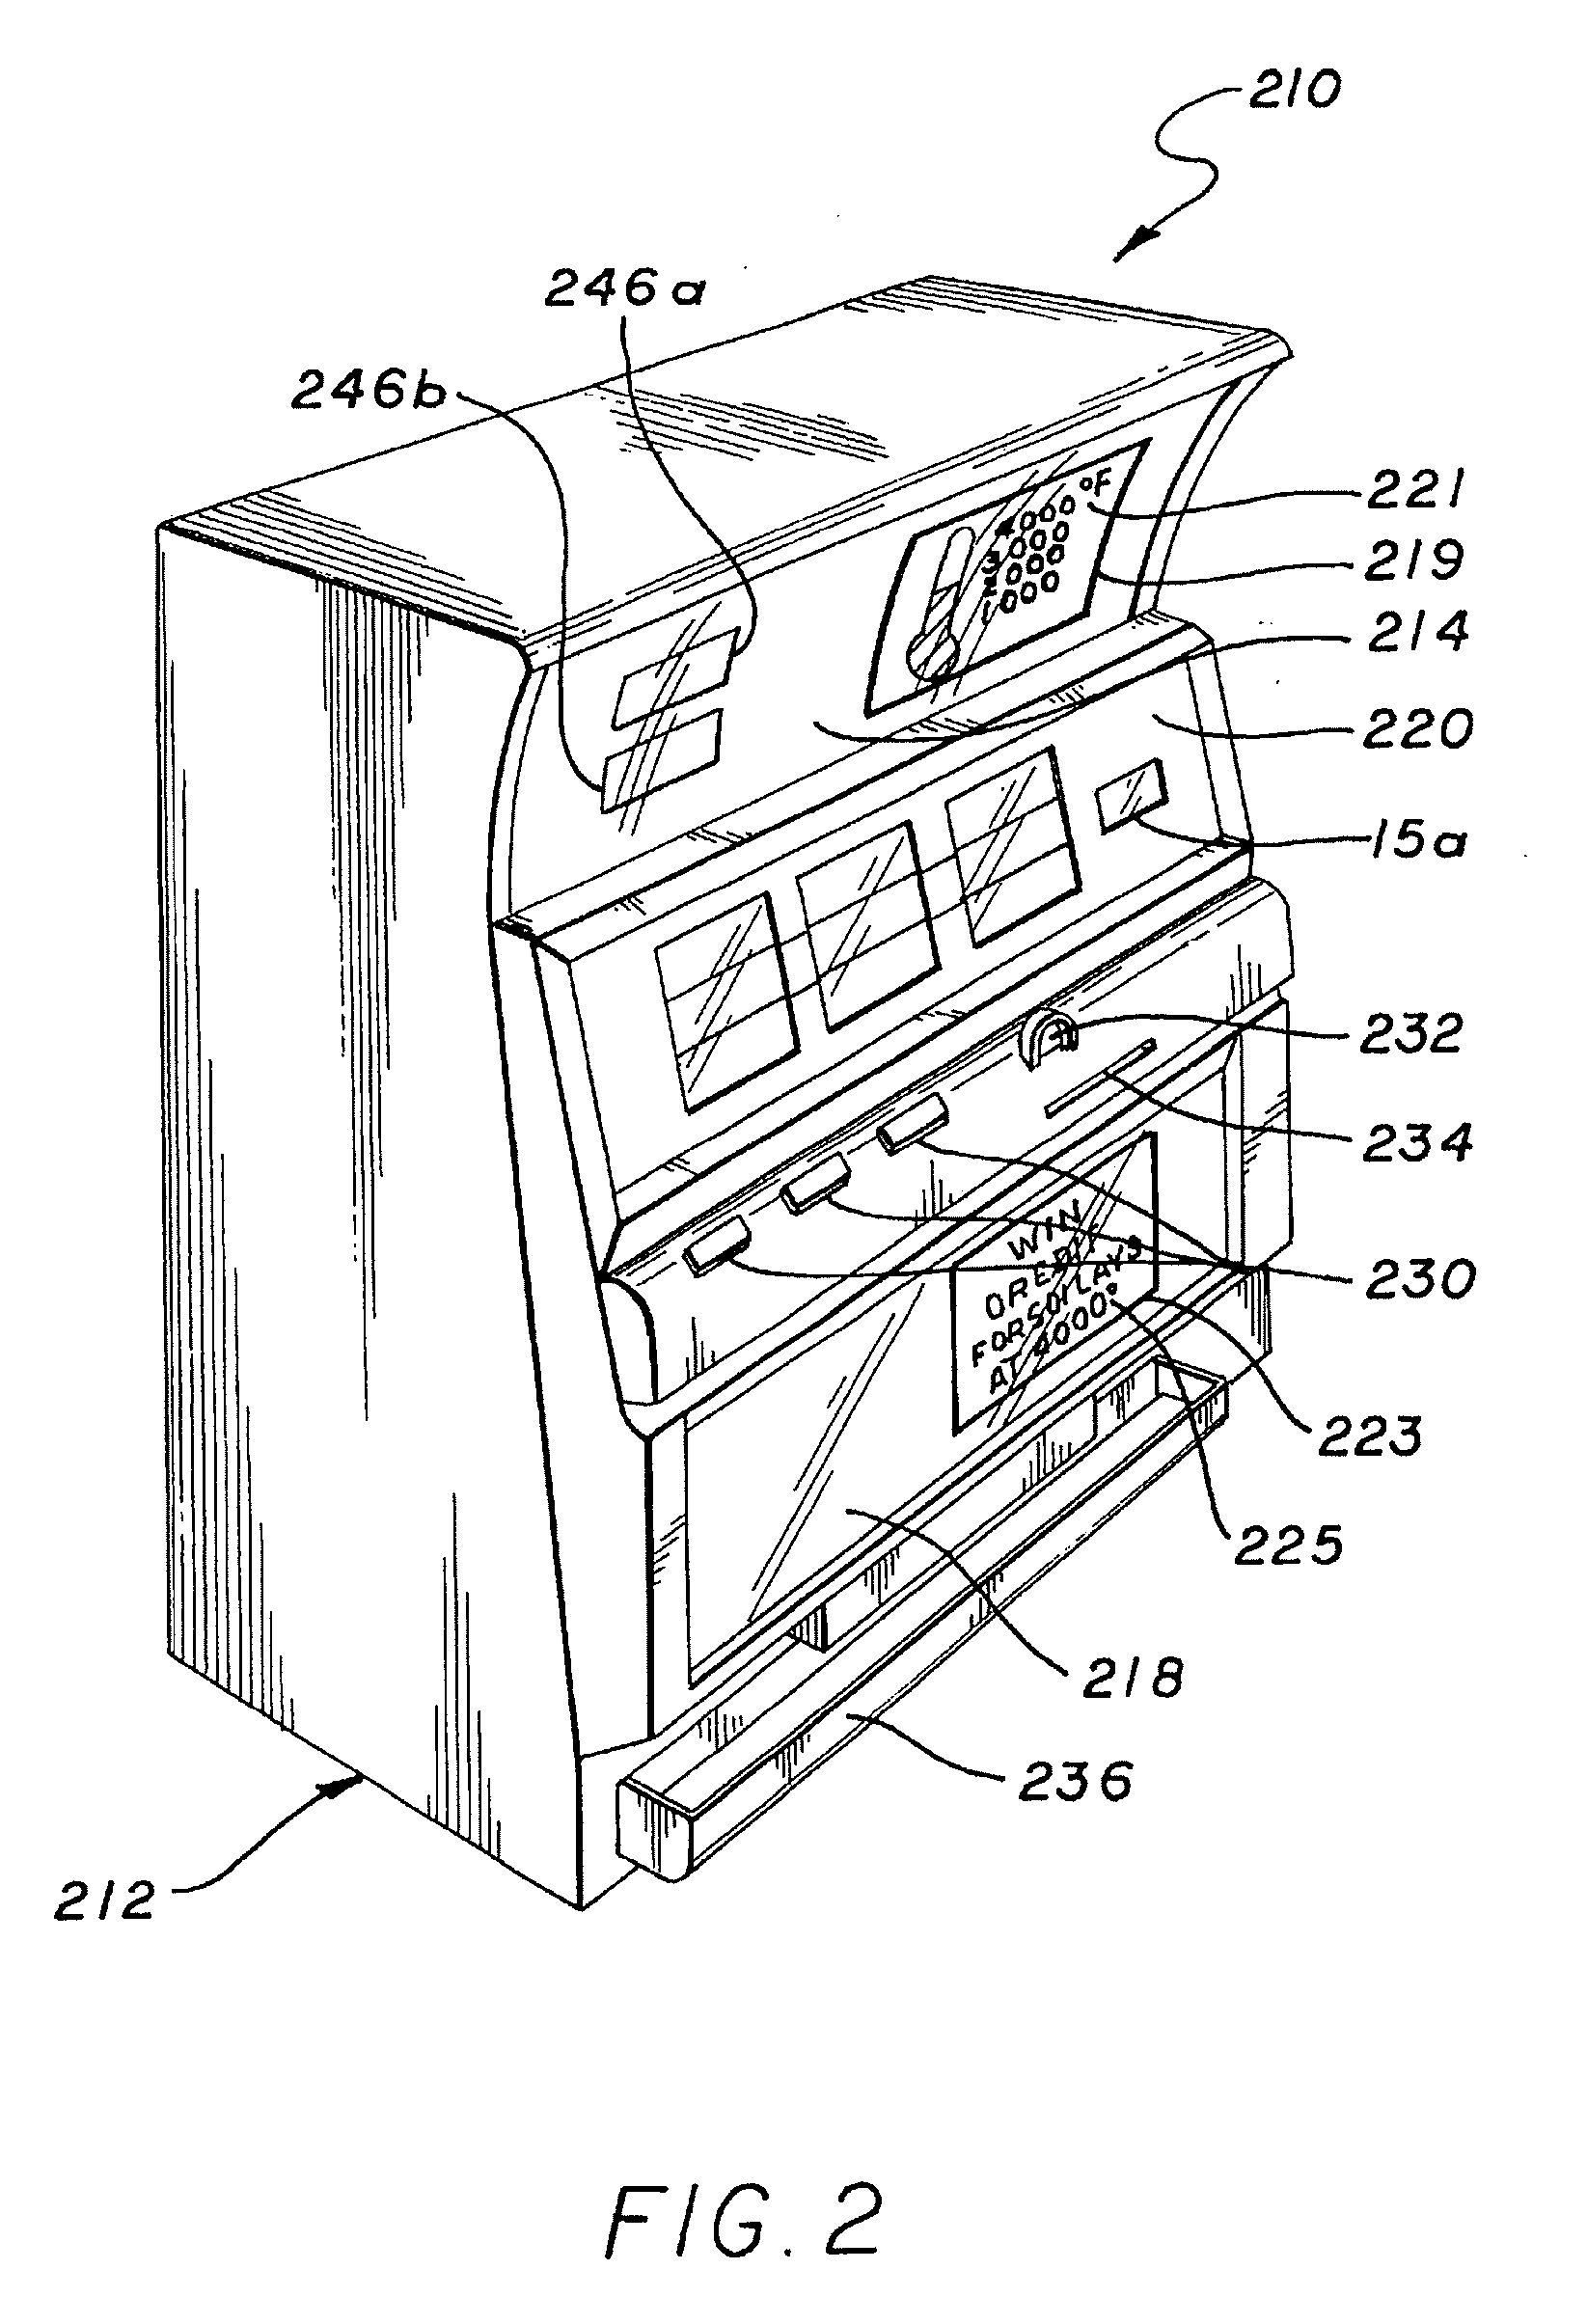 Gaming machine having secondary display for providing video content